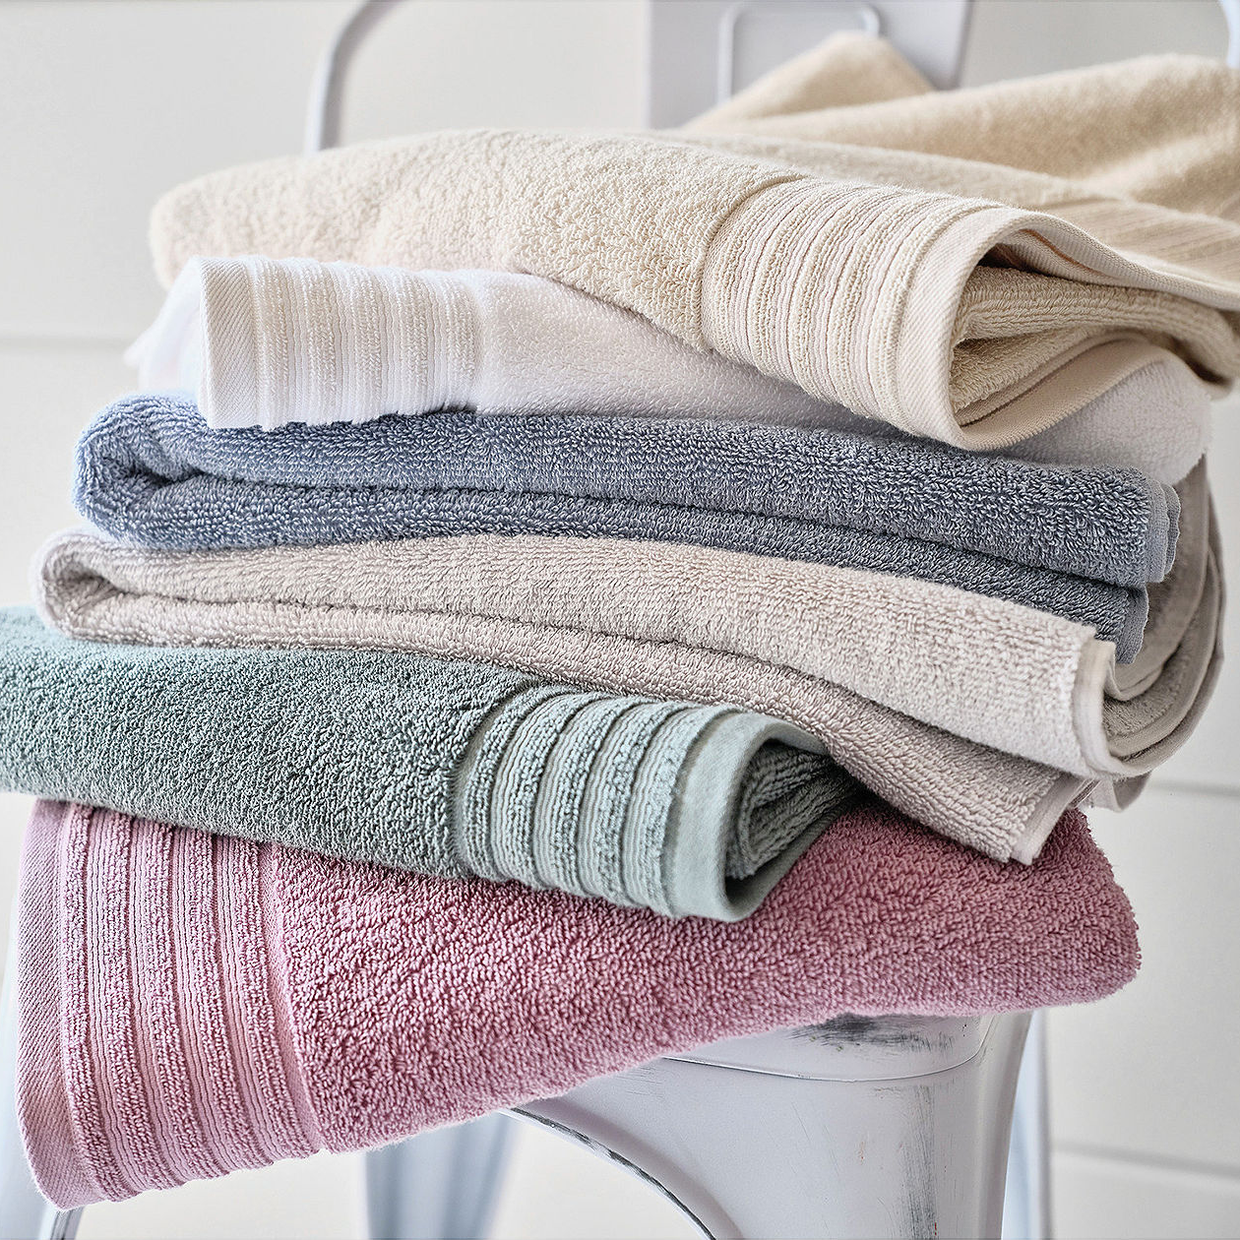 A stack of folded towels in various pastel colors.